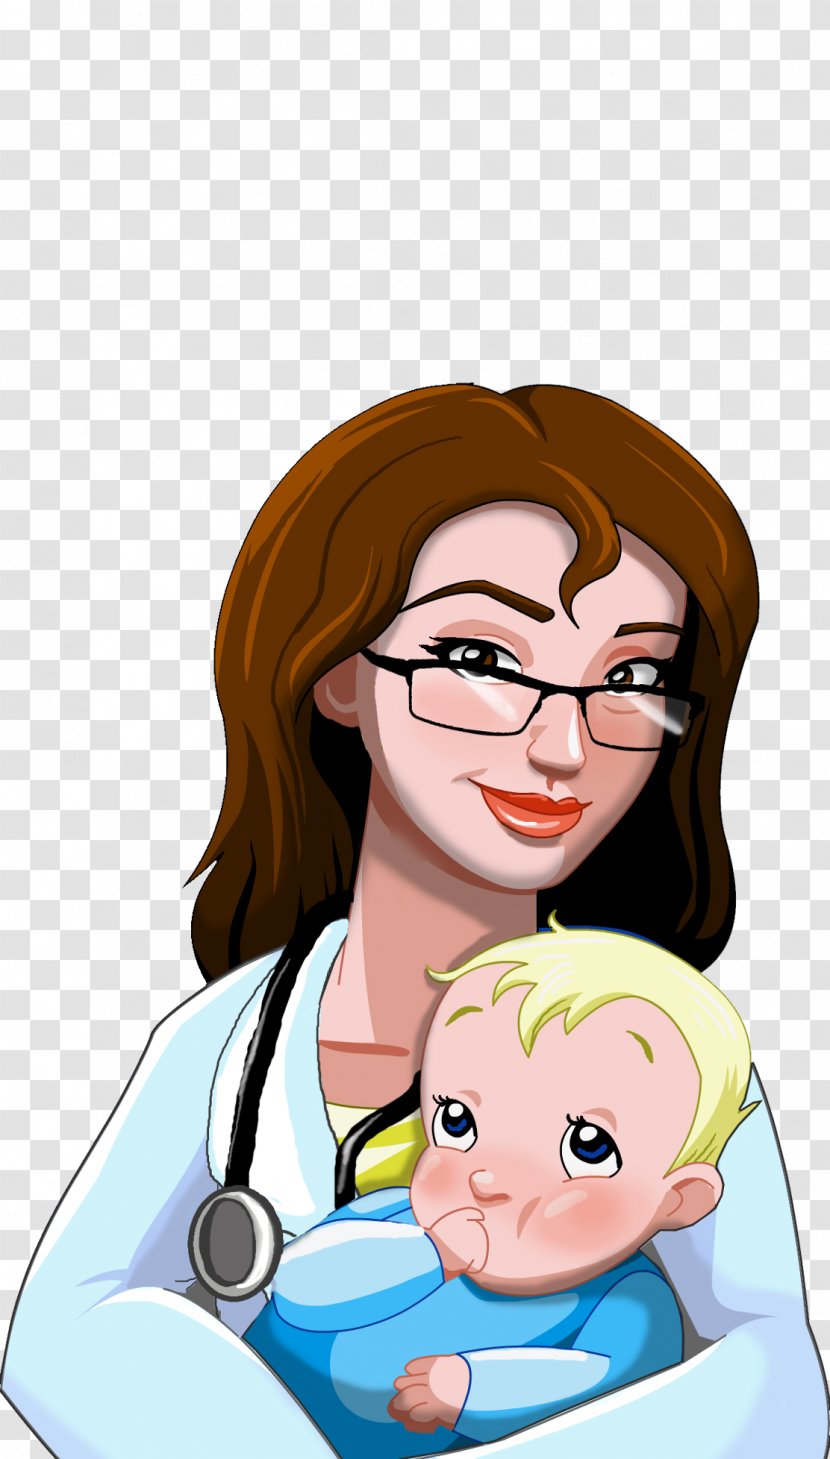 Dreamjob: Kid's Doctor Physician Hospital Medicine Playing - Heart - Child Transparent PNG